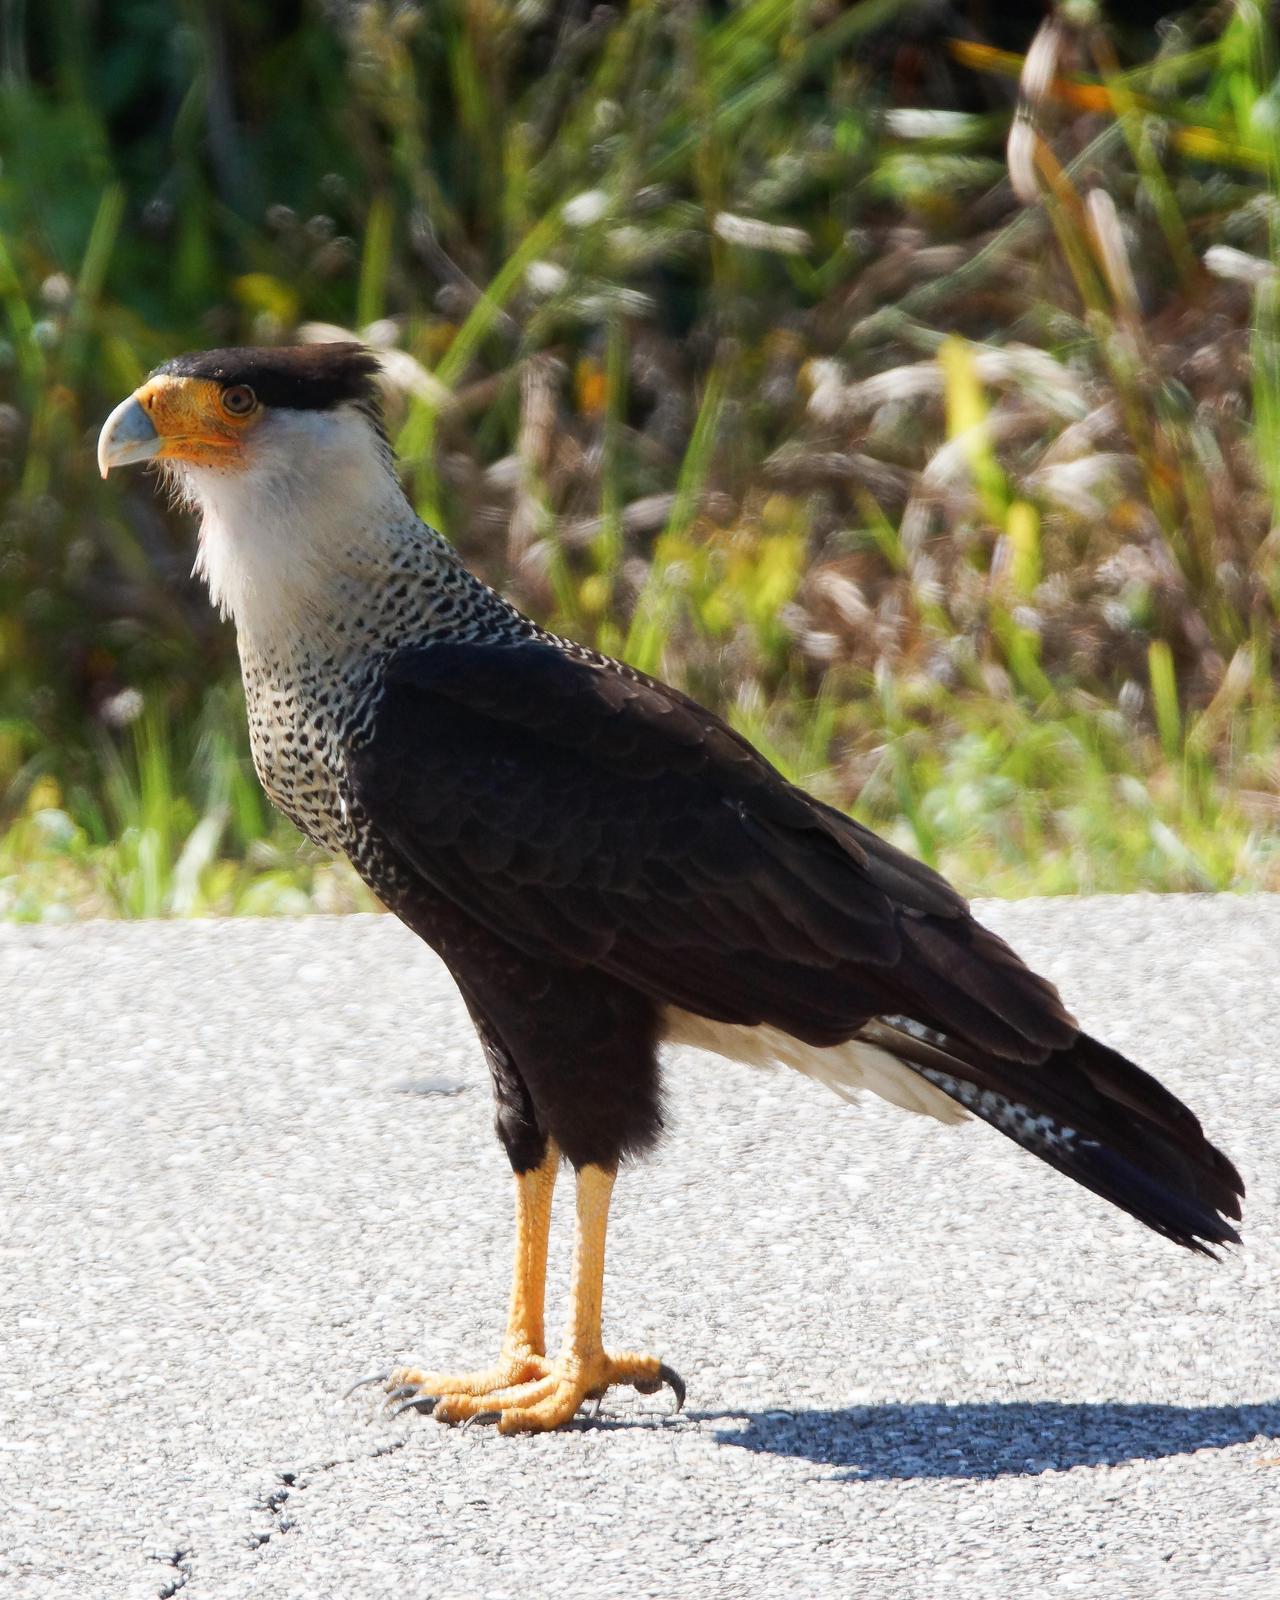 Crested Caracara Photo by Emily Percival